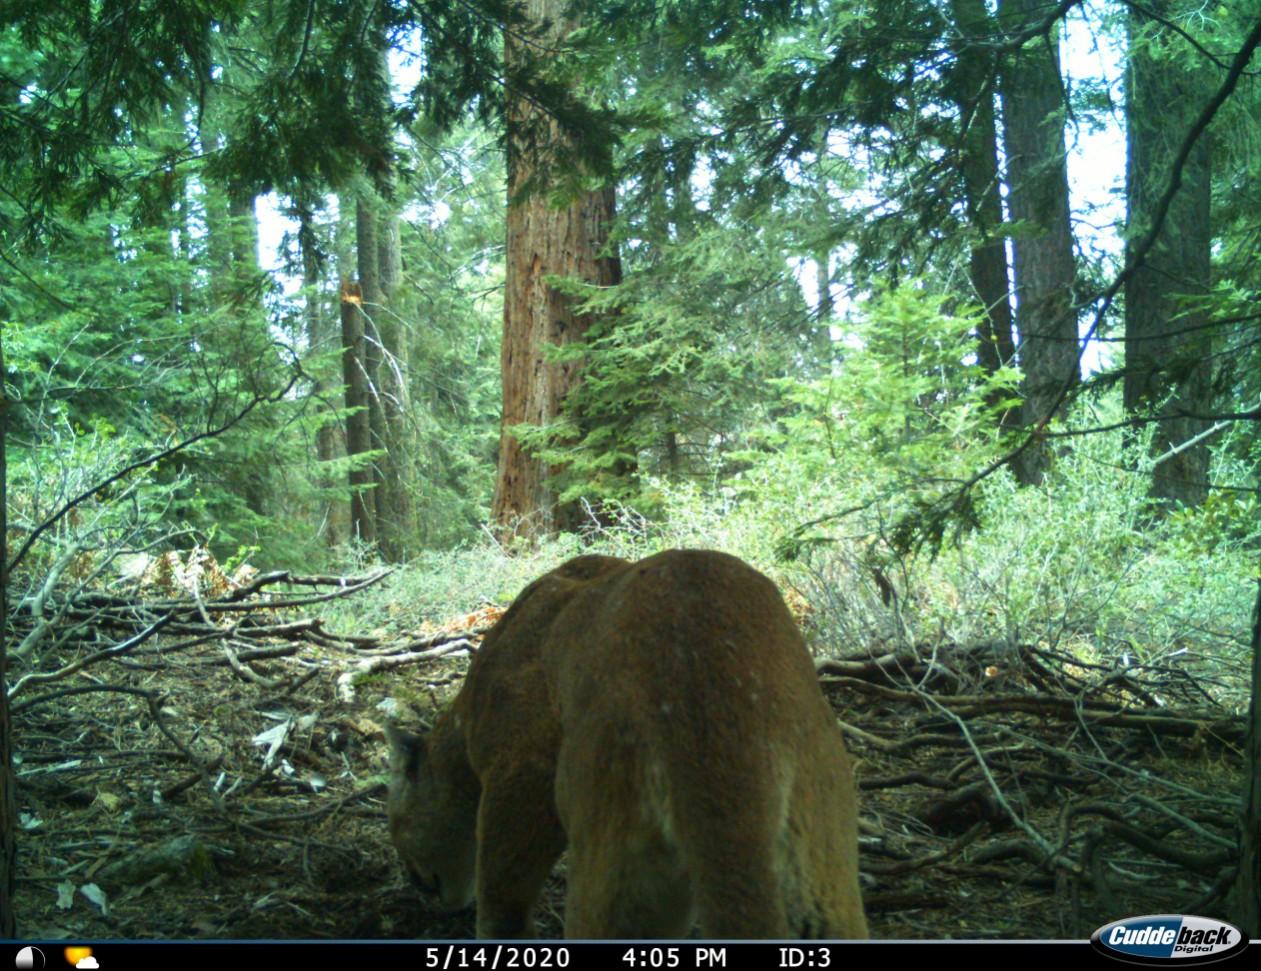 A wildife camera trap catches a glimpse of a mature mountain lion from behind as it makes its way through a redwood forest.